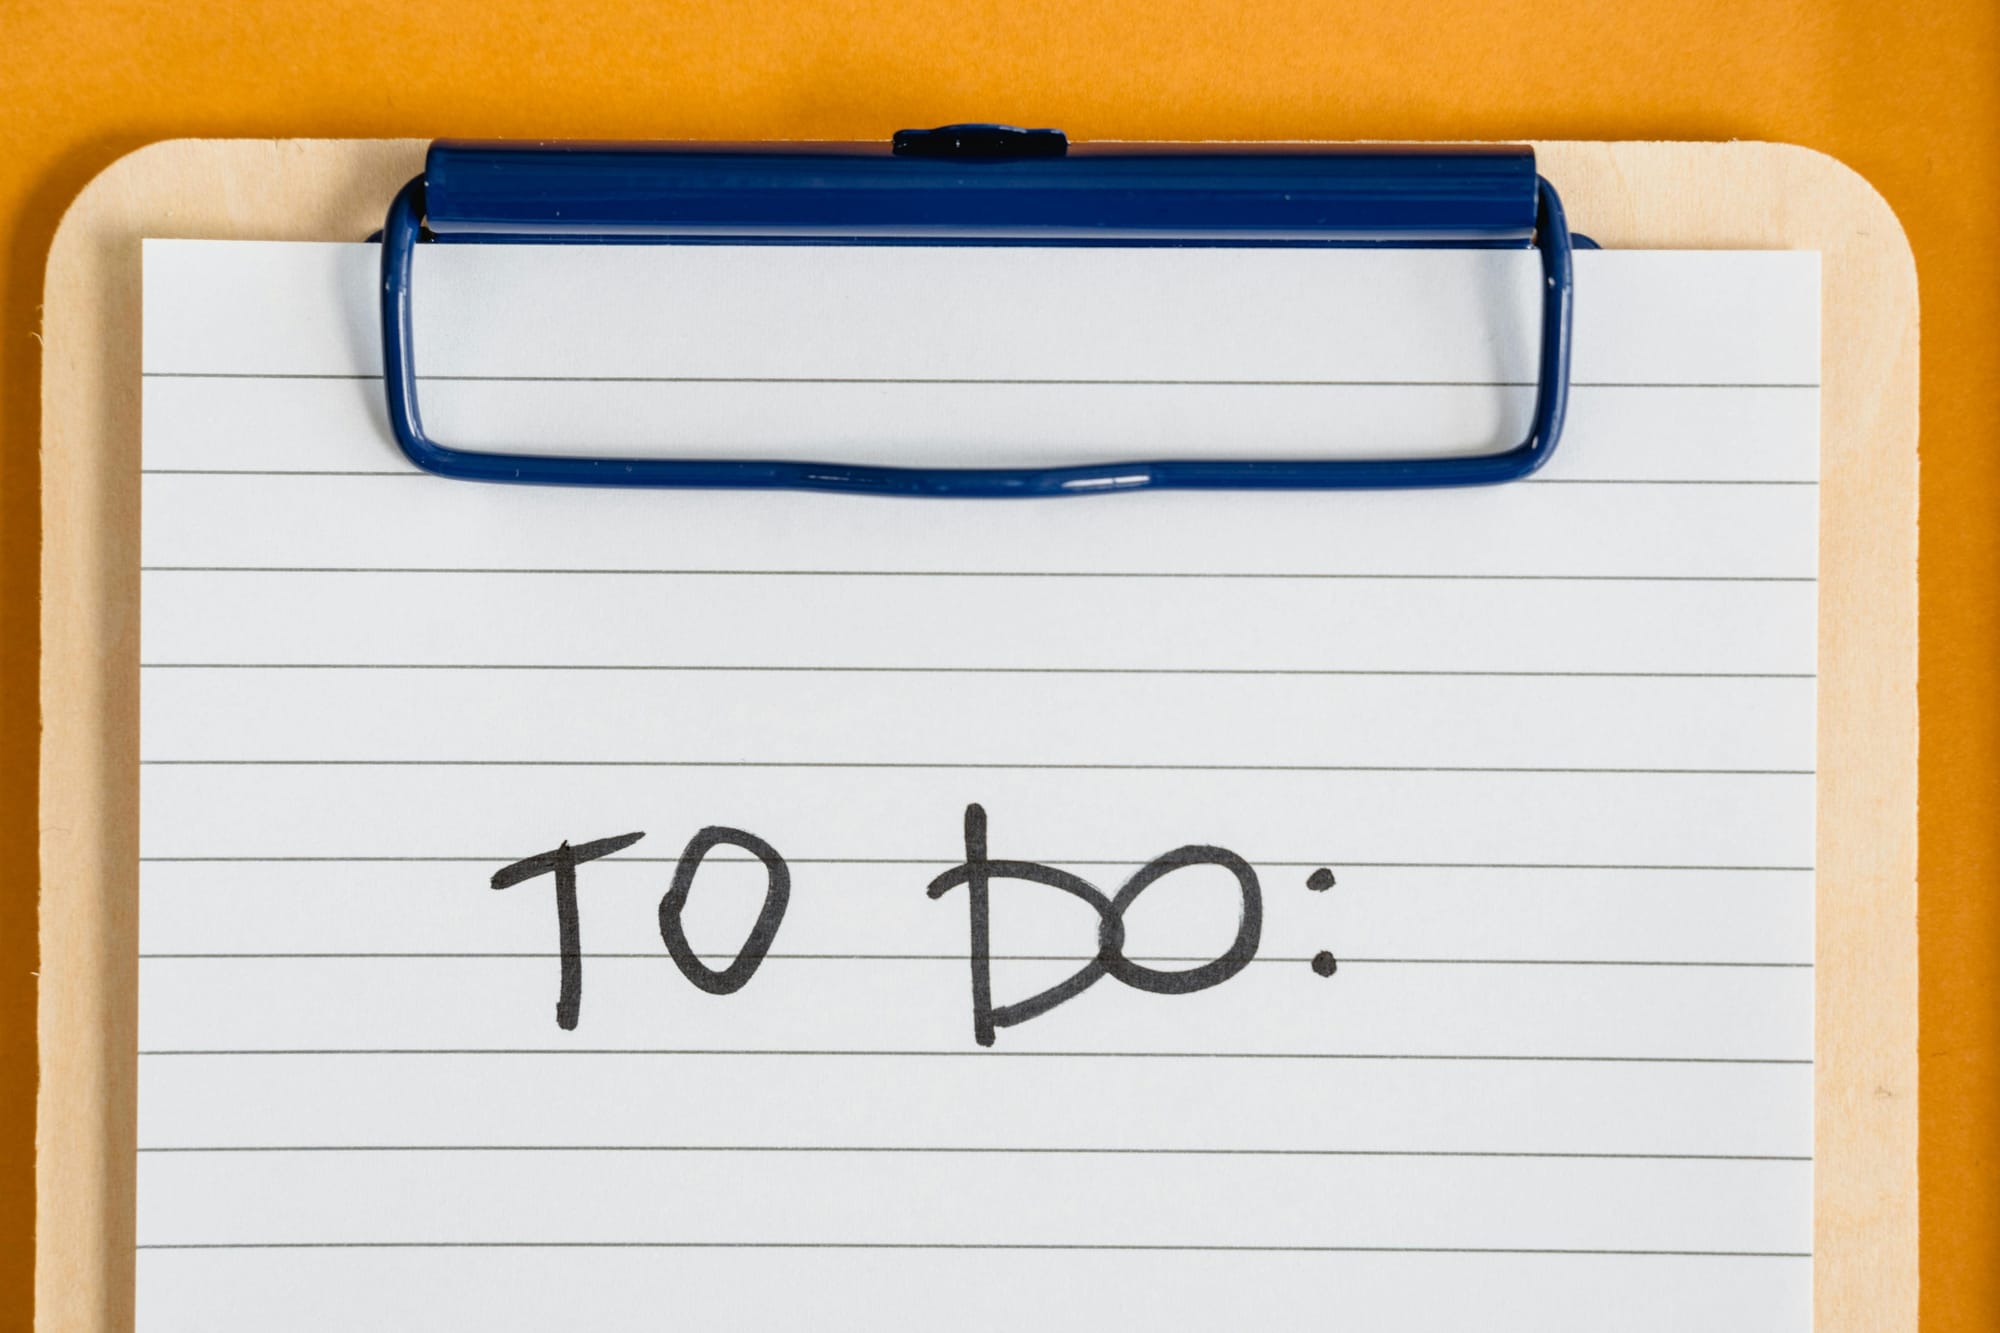 A clipboard has a single sheet of lined paper on it that reads "TO DO:" with an orange background